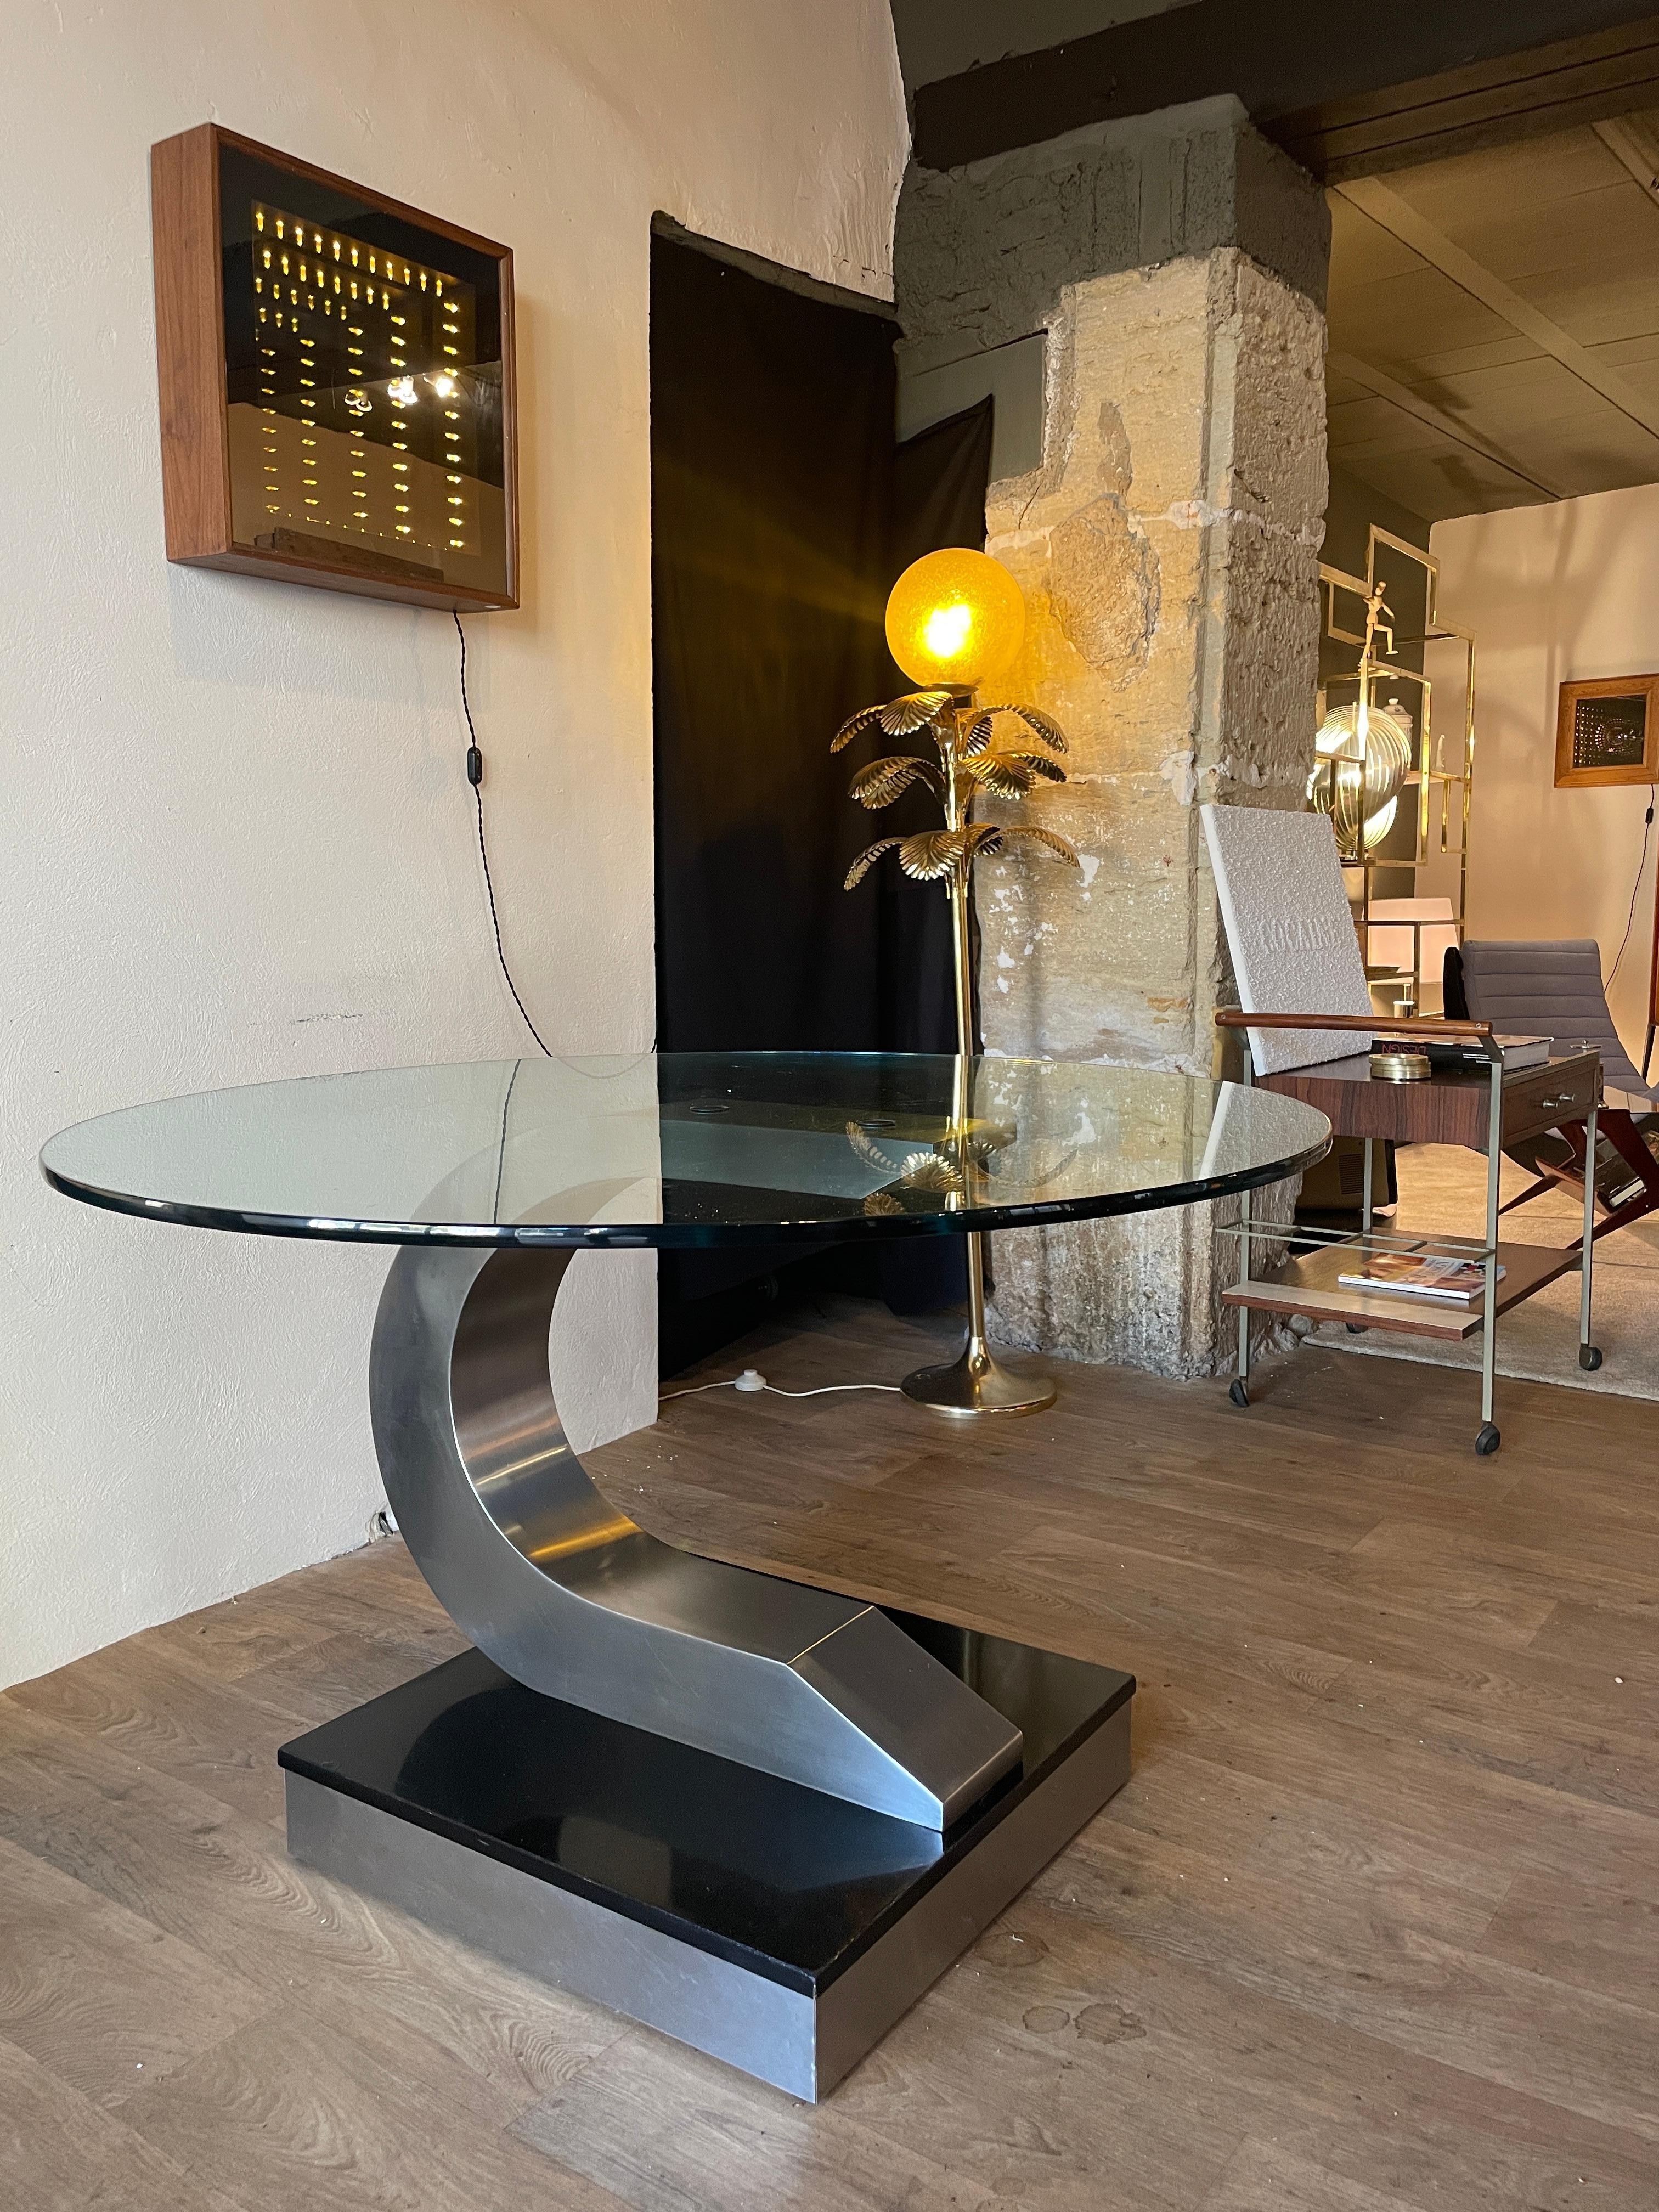 Round dining table by Willy Rizzo for Mario Sabot, top in 2 cm thick glass. Lacquered wood and steel structure. 70s design.
For an interior design, space age, seventies, pop, ... In the style of Willy Rizzo, Knoll, Ico Parisi, Romeo Rega, Eames.